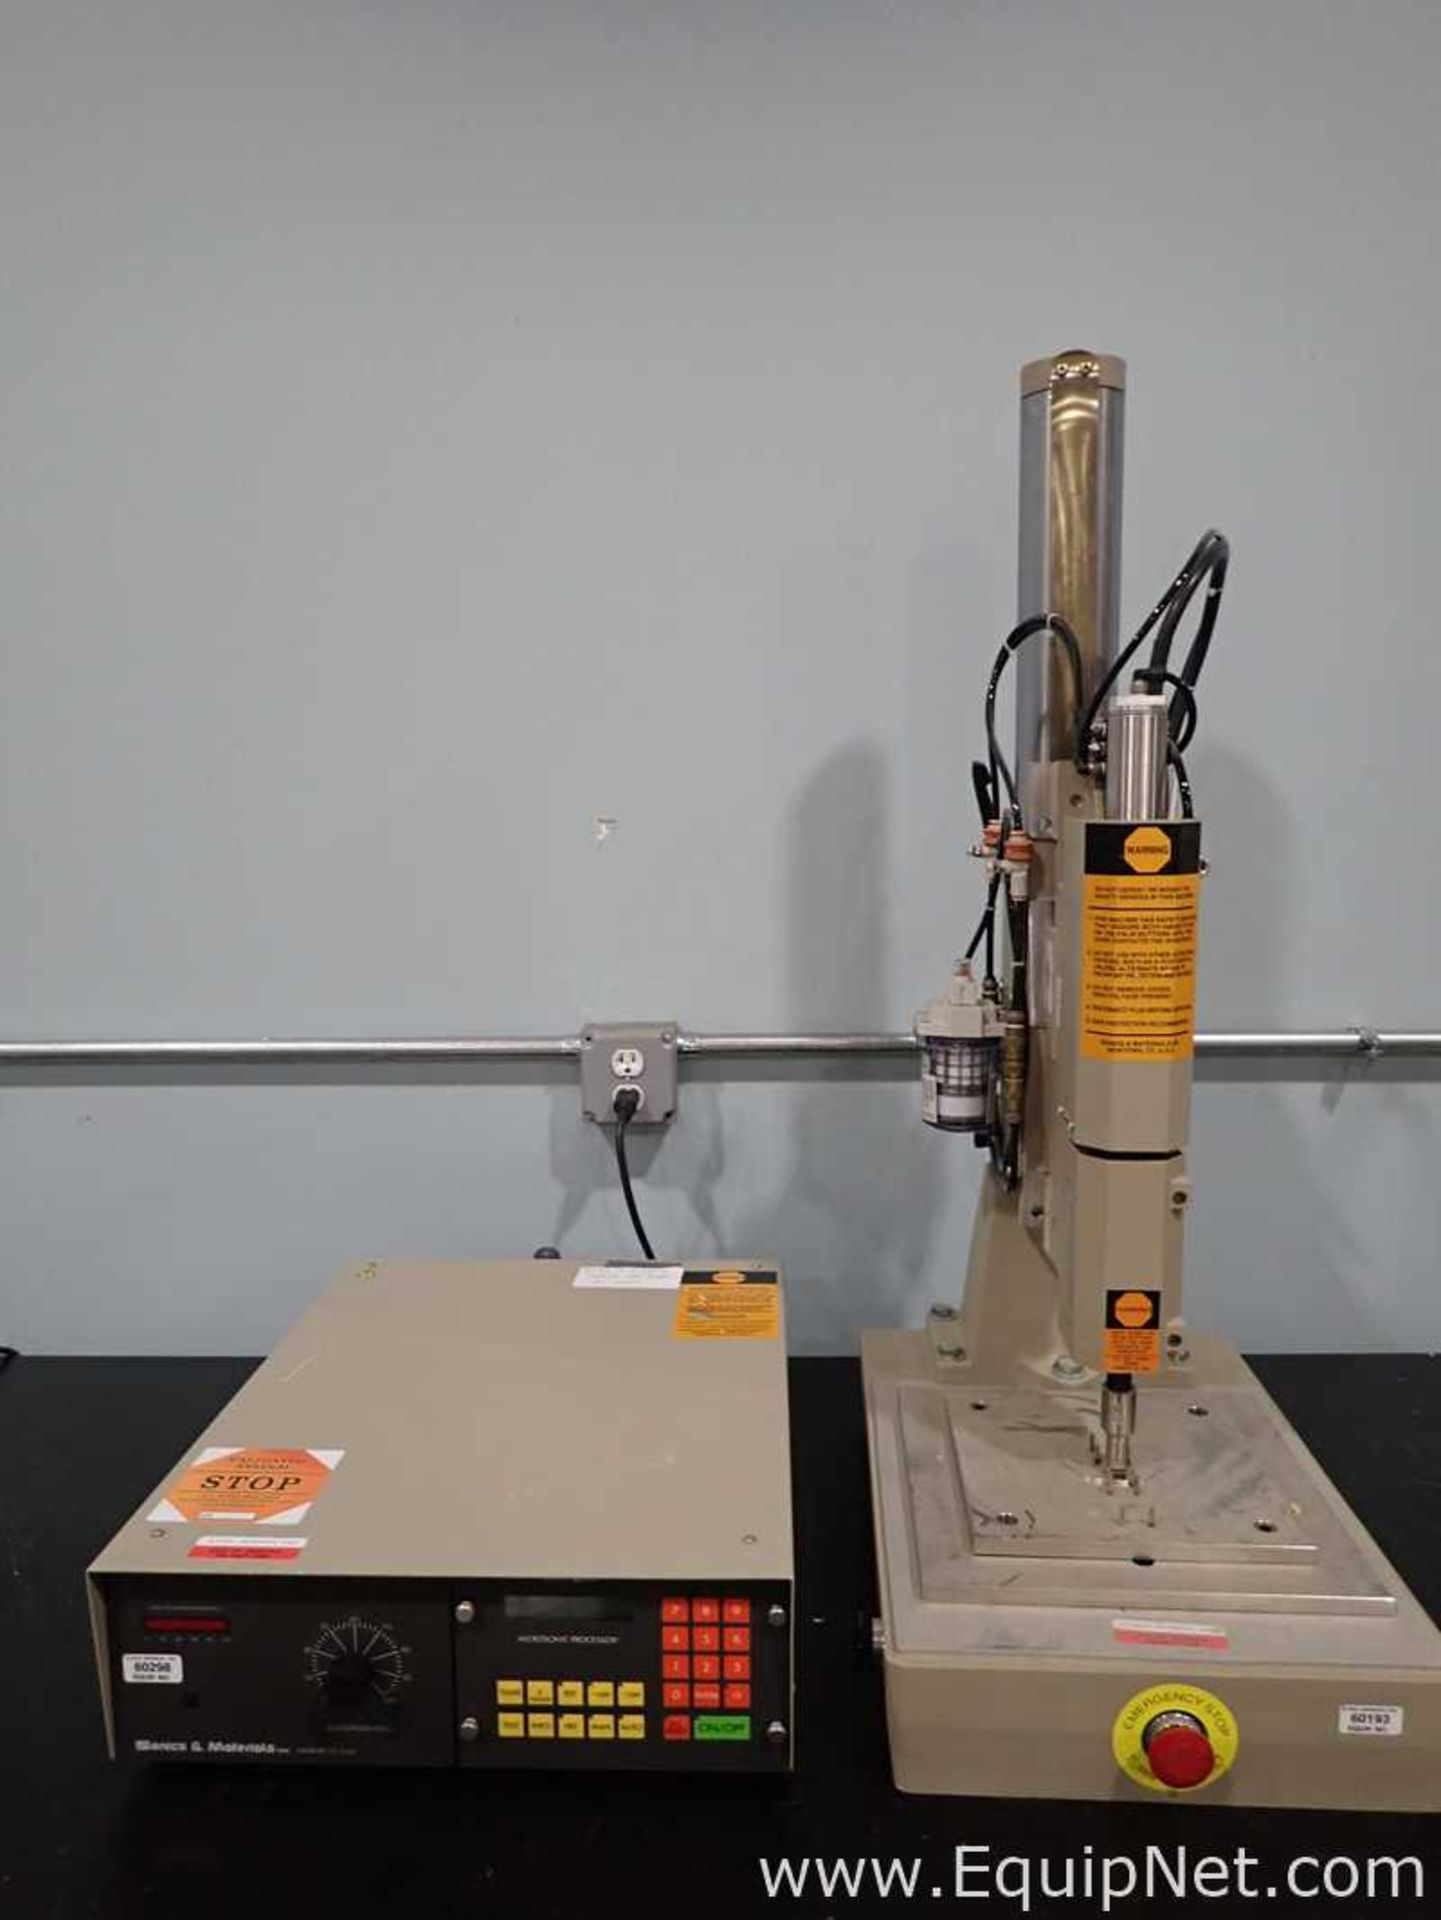 Sonics and Materials 4095 Pneumatic Press with Microsonic Processor for Ultrasonic Plastic Assembly